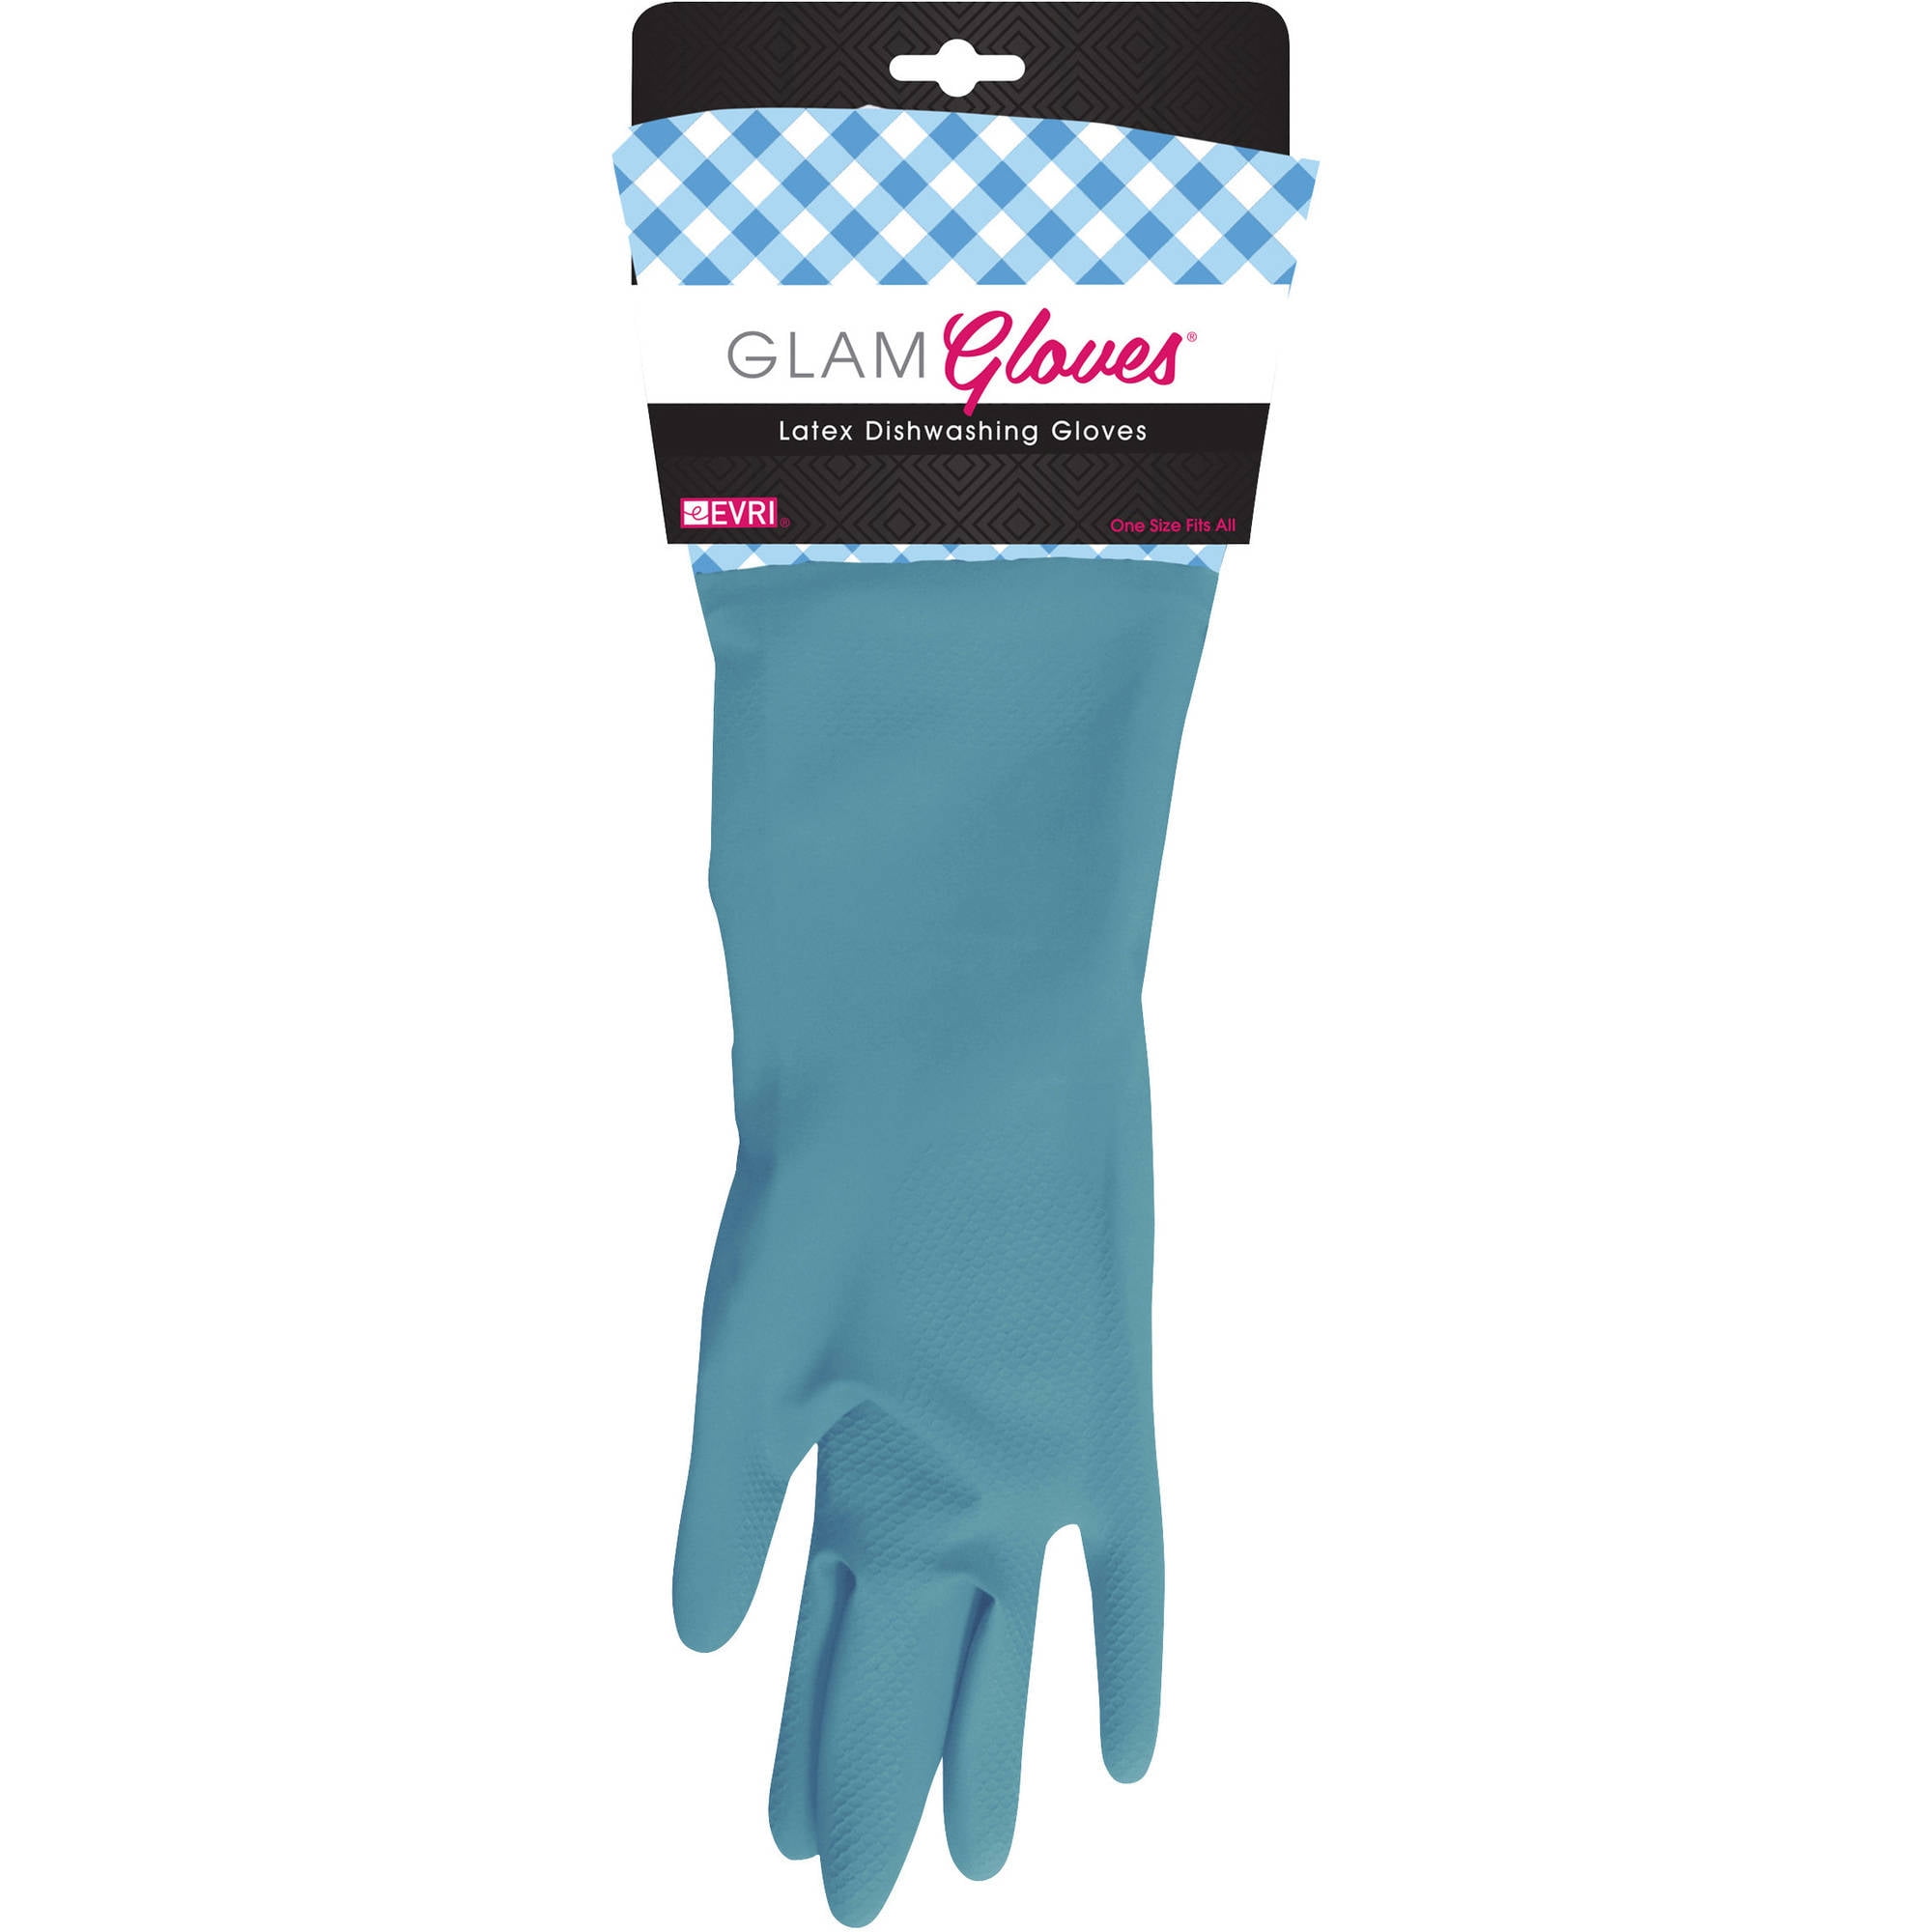 New Glam Gloves Latex Cleaning Gloves Dishwashing Gloves Long Cuff 